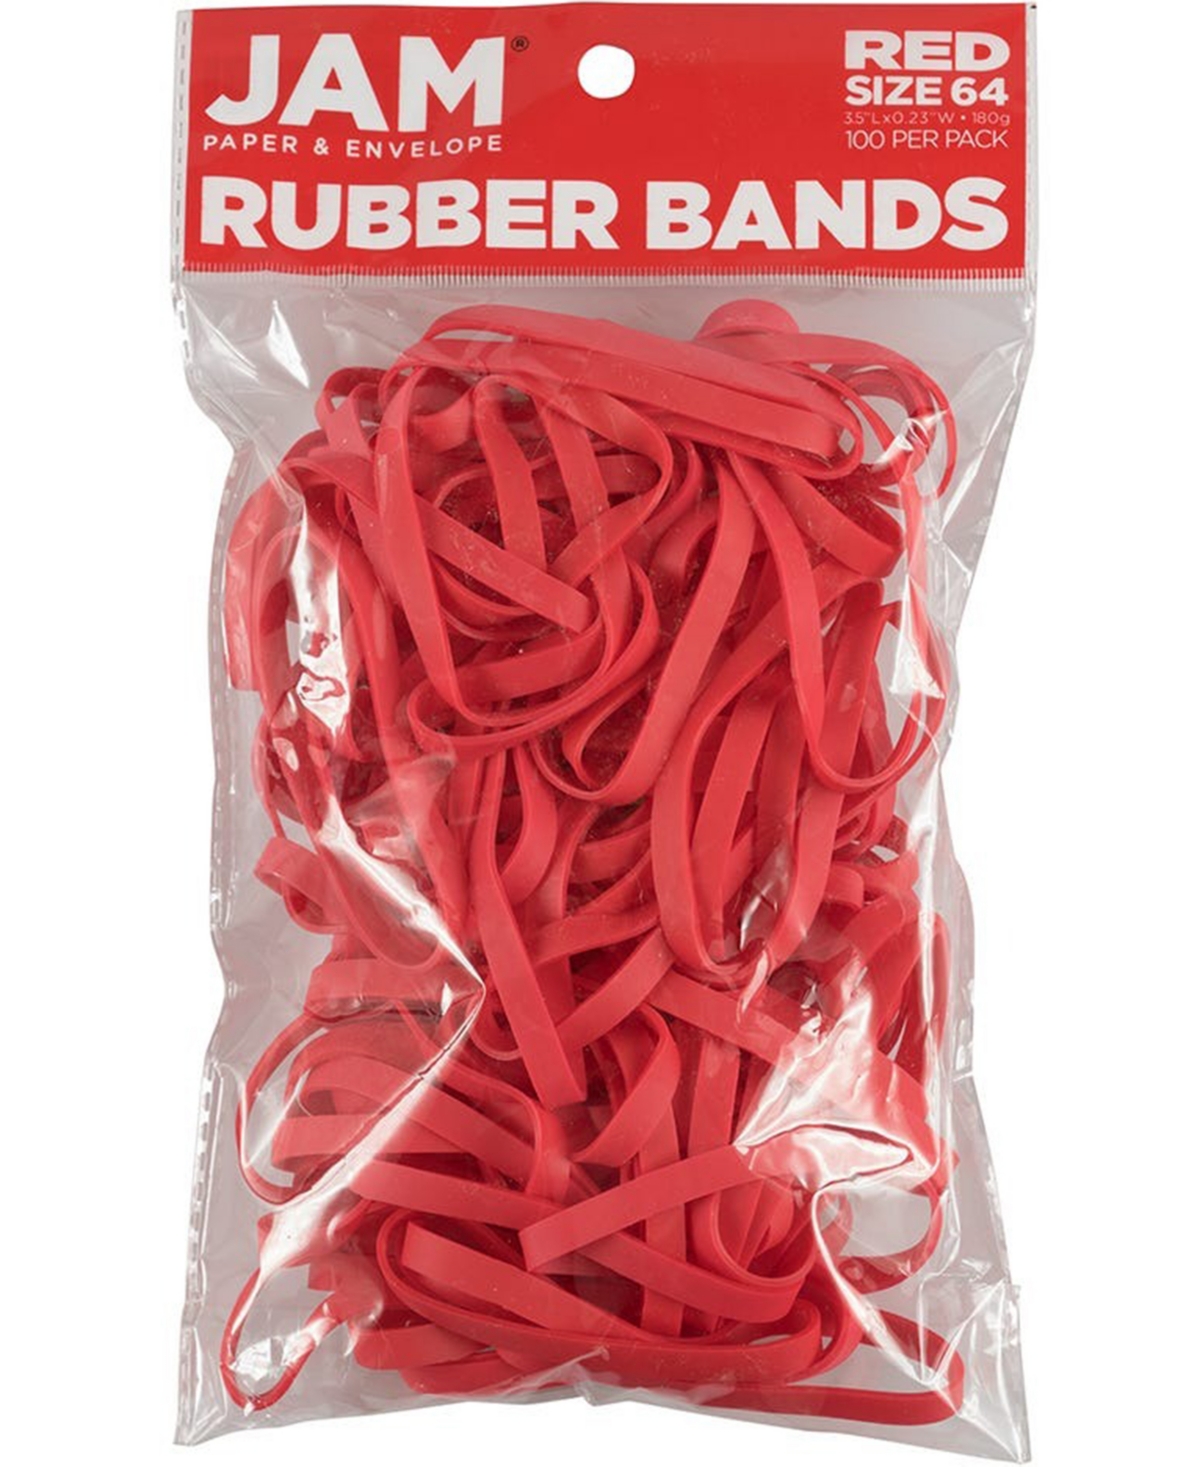 Durable Rubber Bands - Size 64 - Multi-Purpose Rubber bands - 100 Per Pack - Red